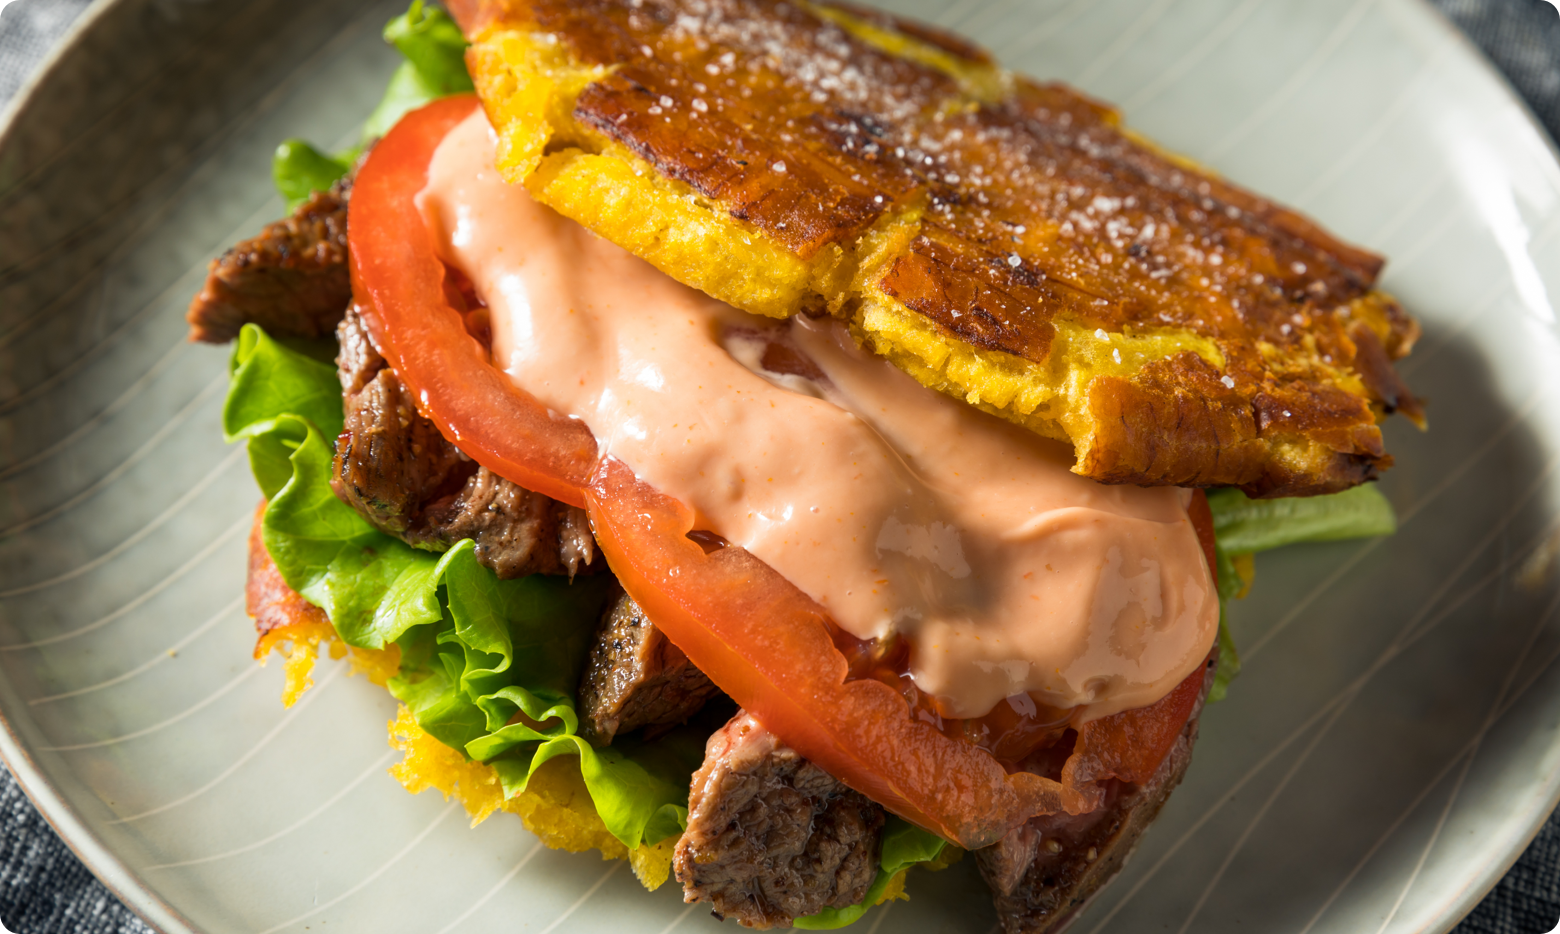 Jibarito is an innovative sandwich that originated from the Puerto Rican